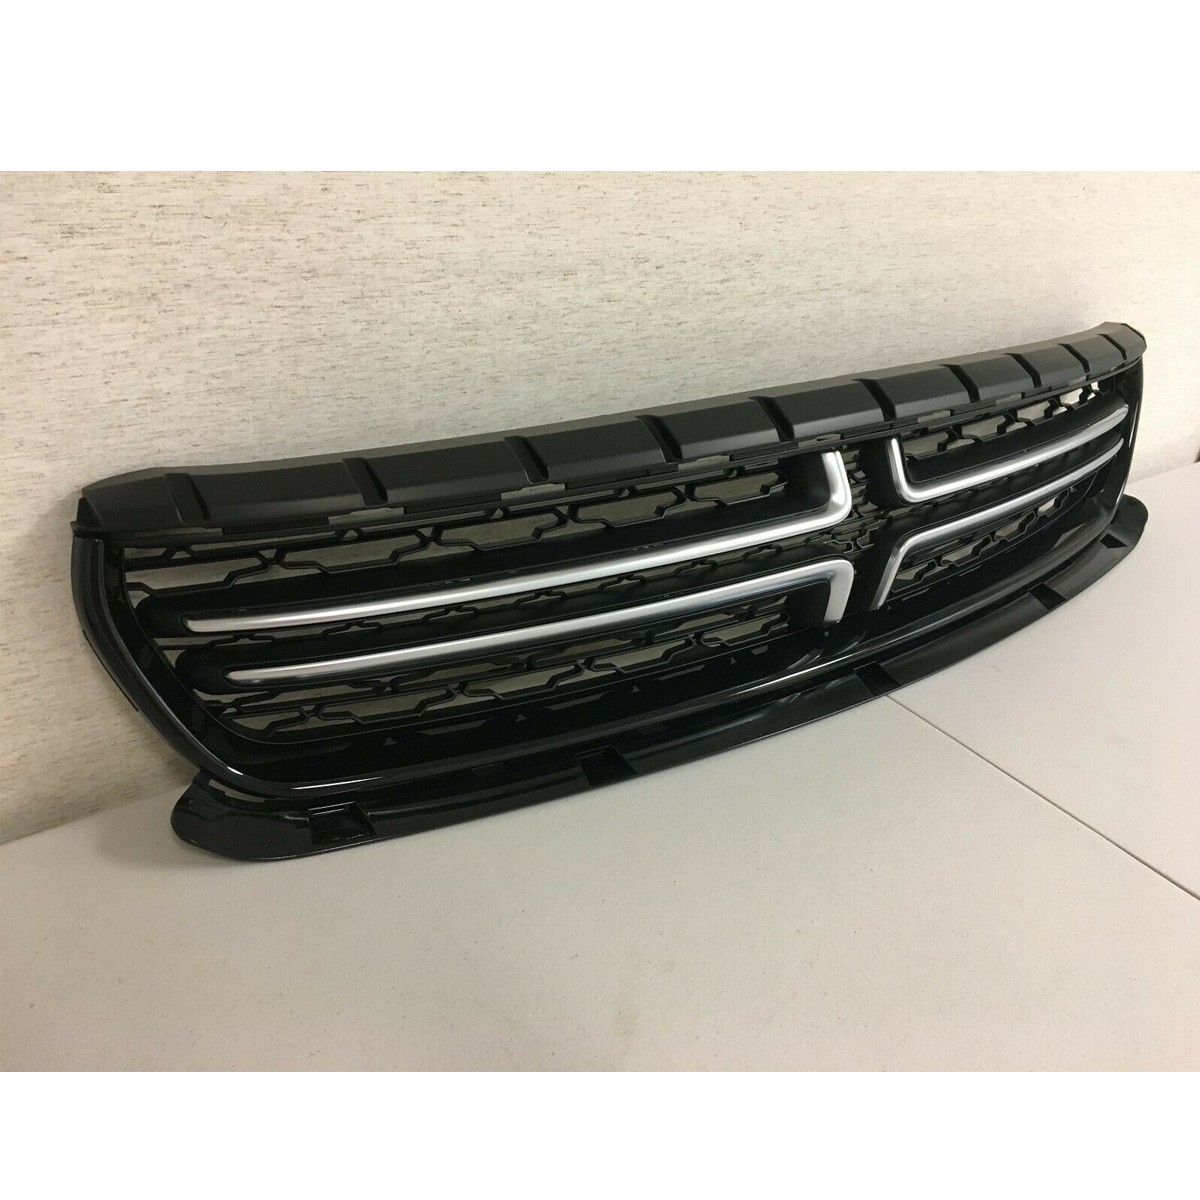 Black & Silver ABS Front Upper Bumper Grill Grille for Dodge Charger 2015-2018